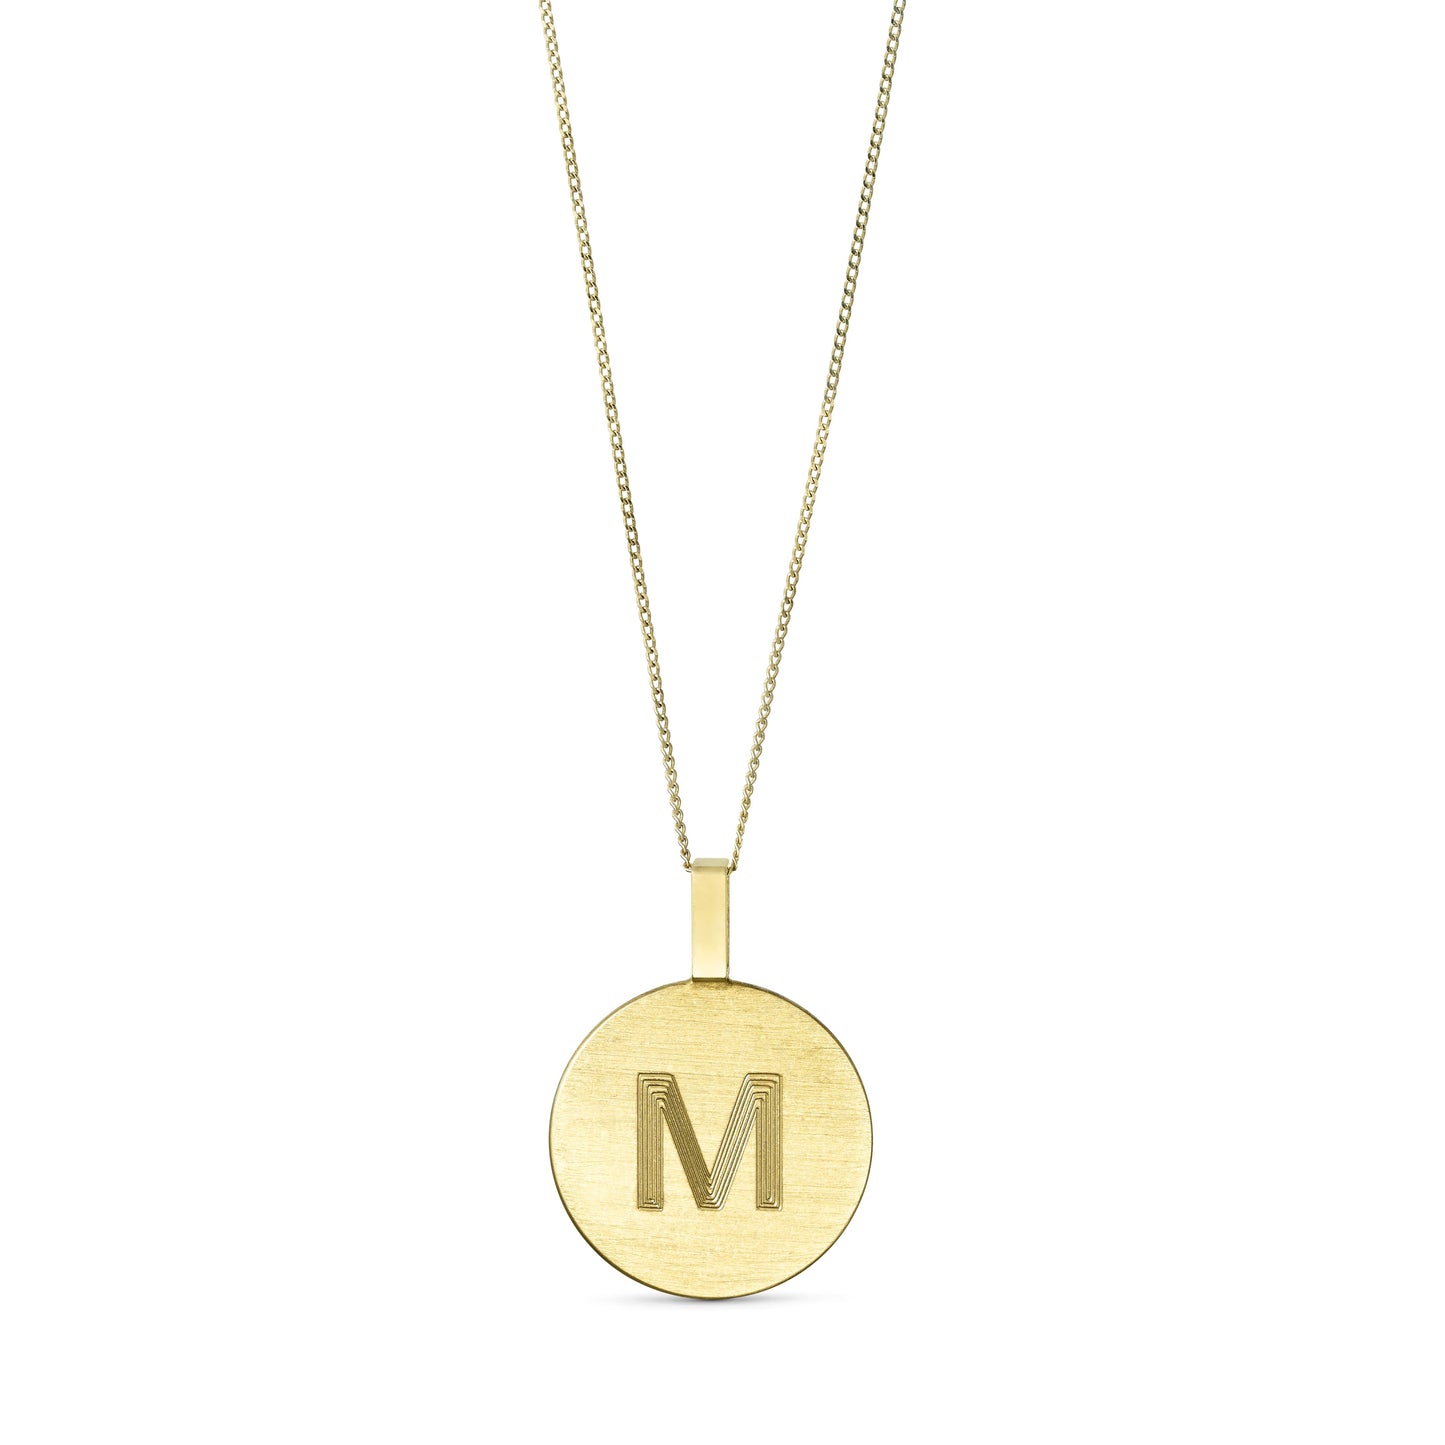 Pendant with single letter